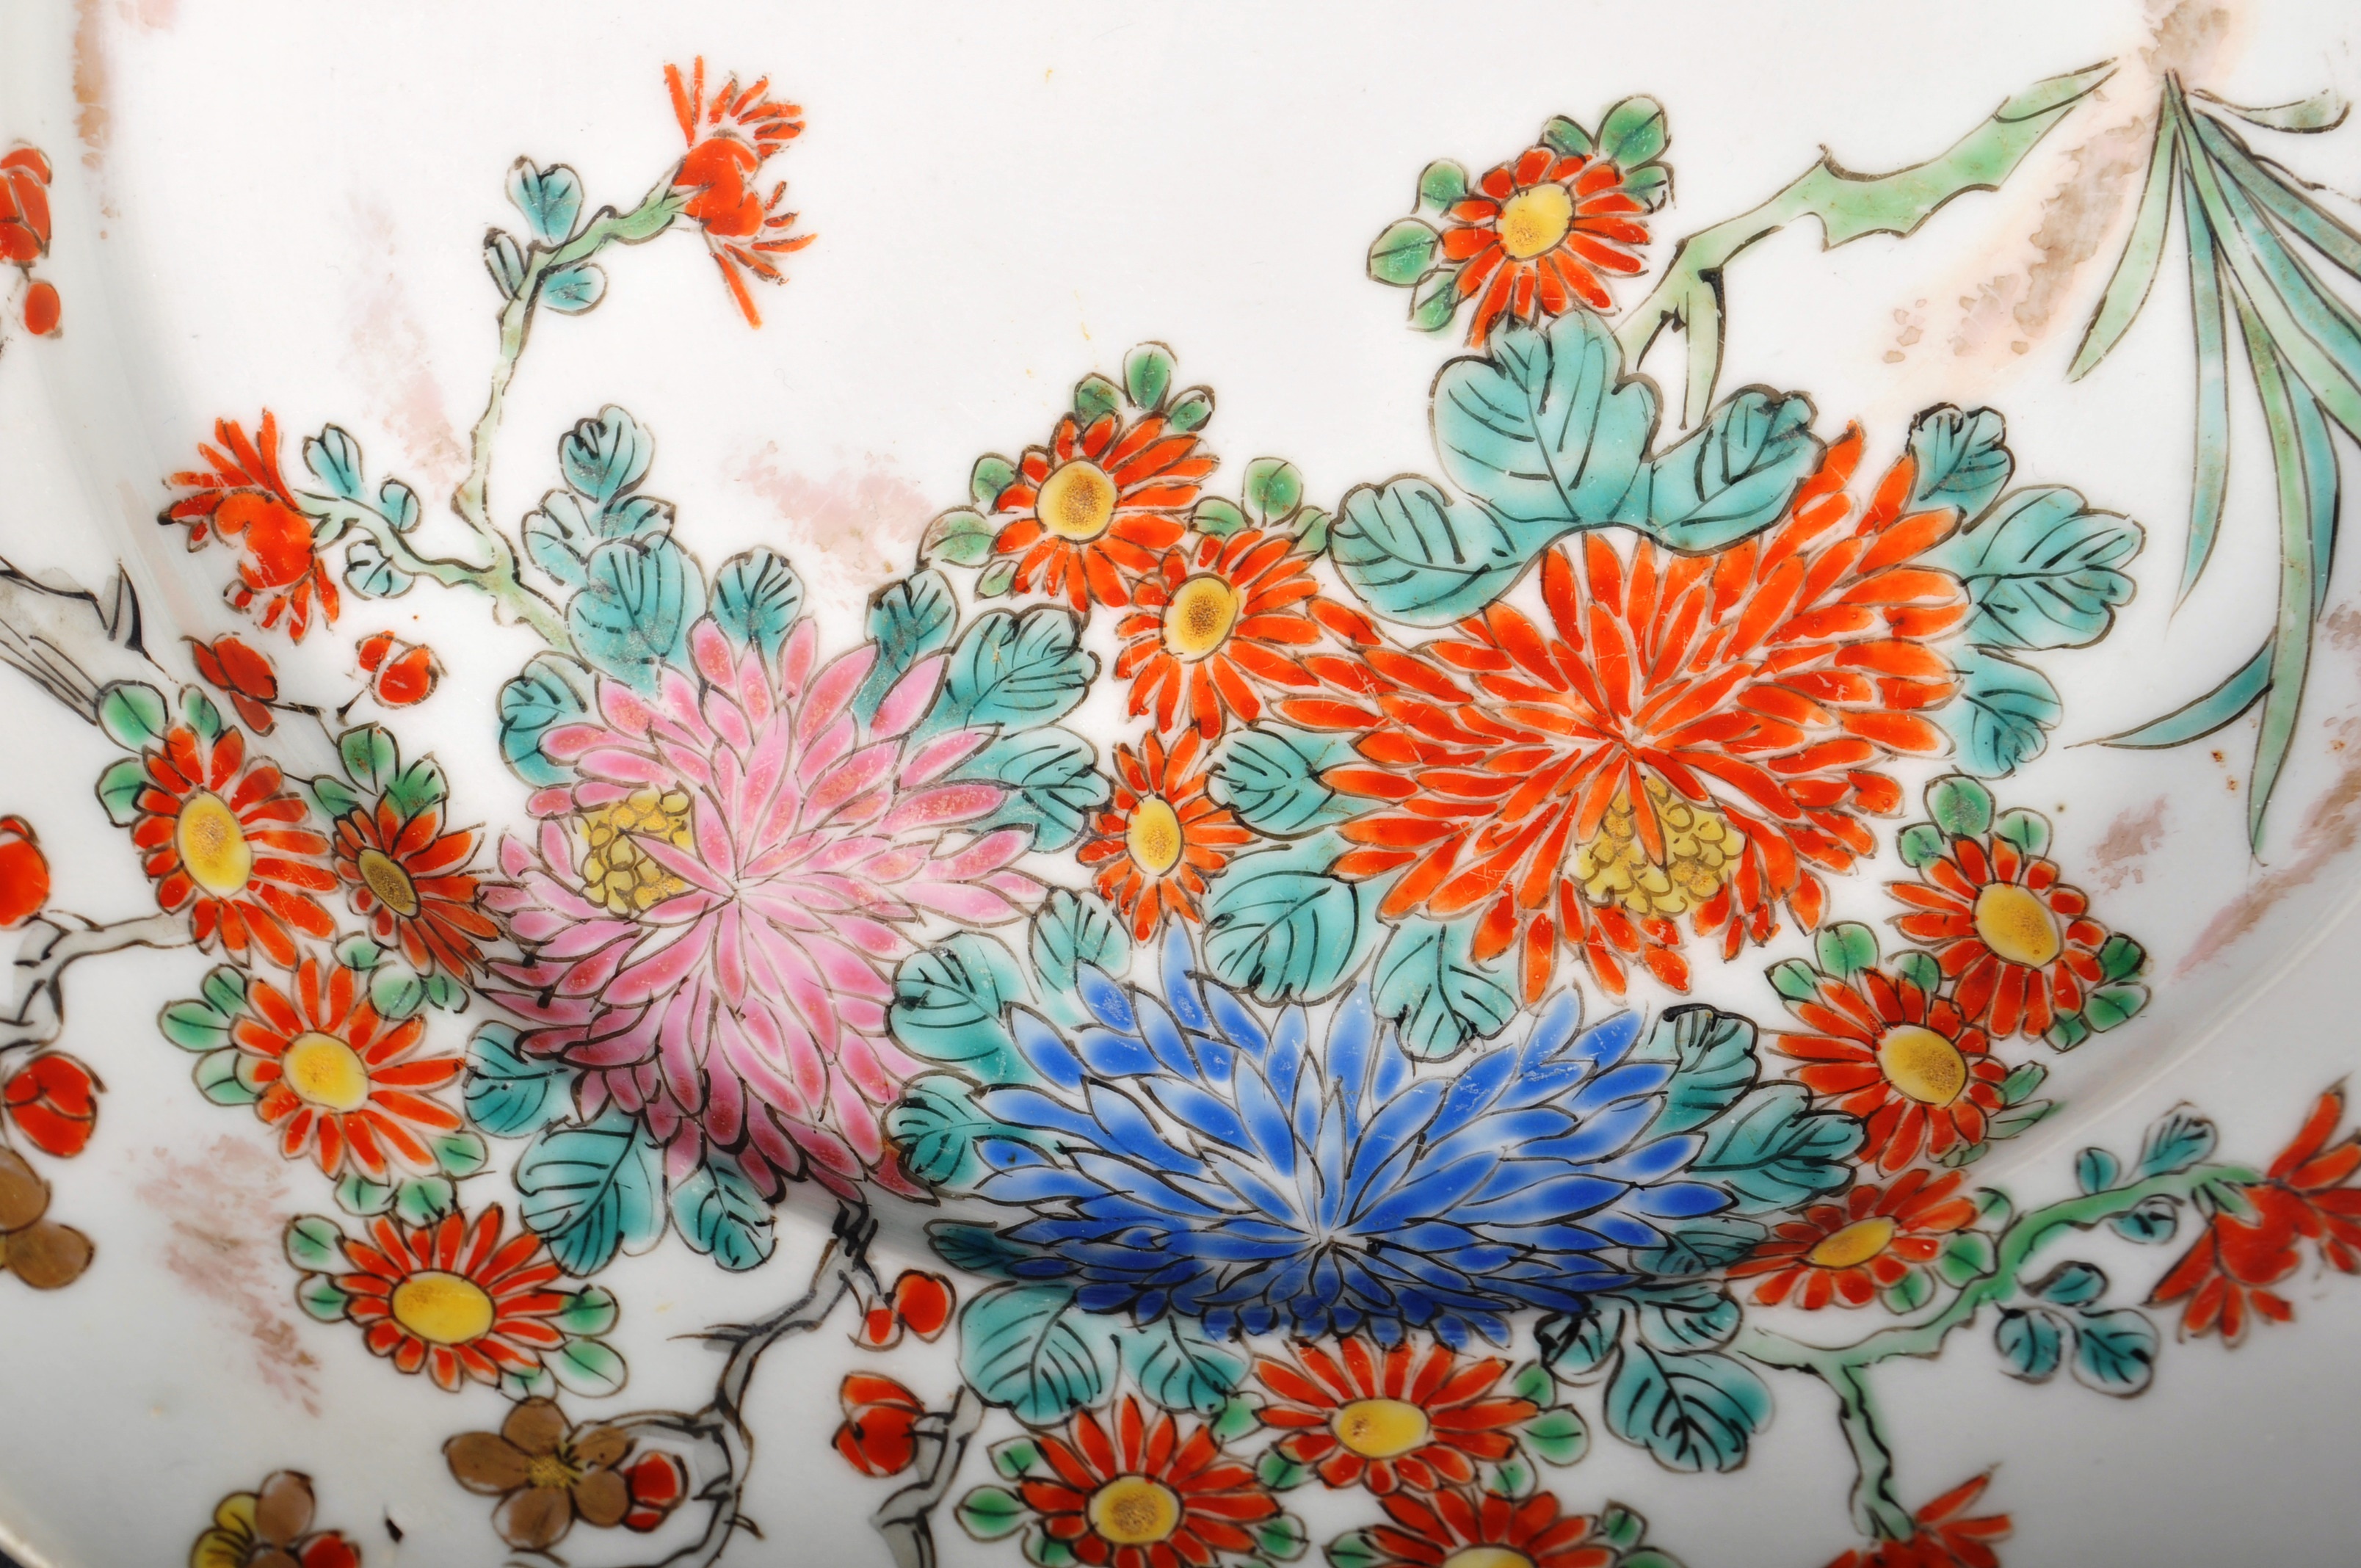 TWO 18TH CENTURY CHINESE QIANLONG PORCELAIN PLATES - Image 6 of 11